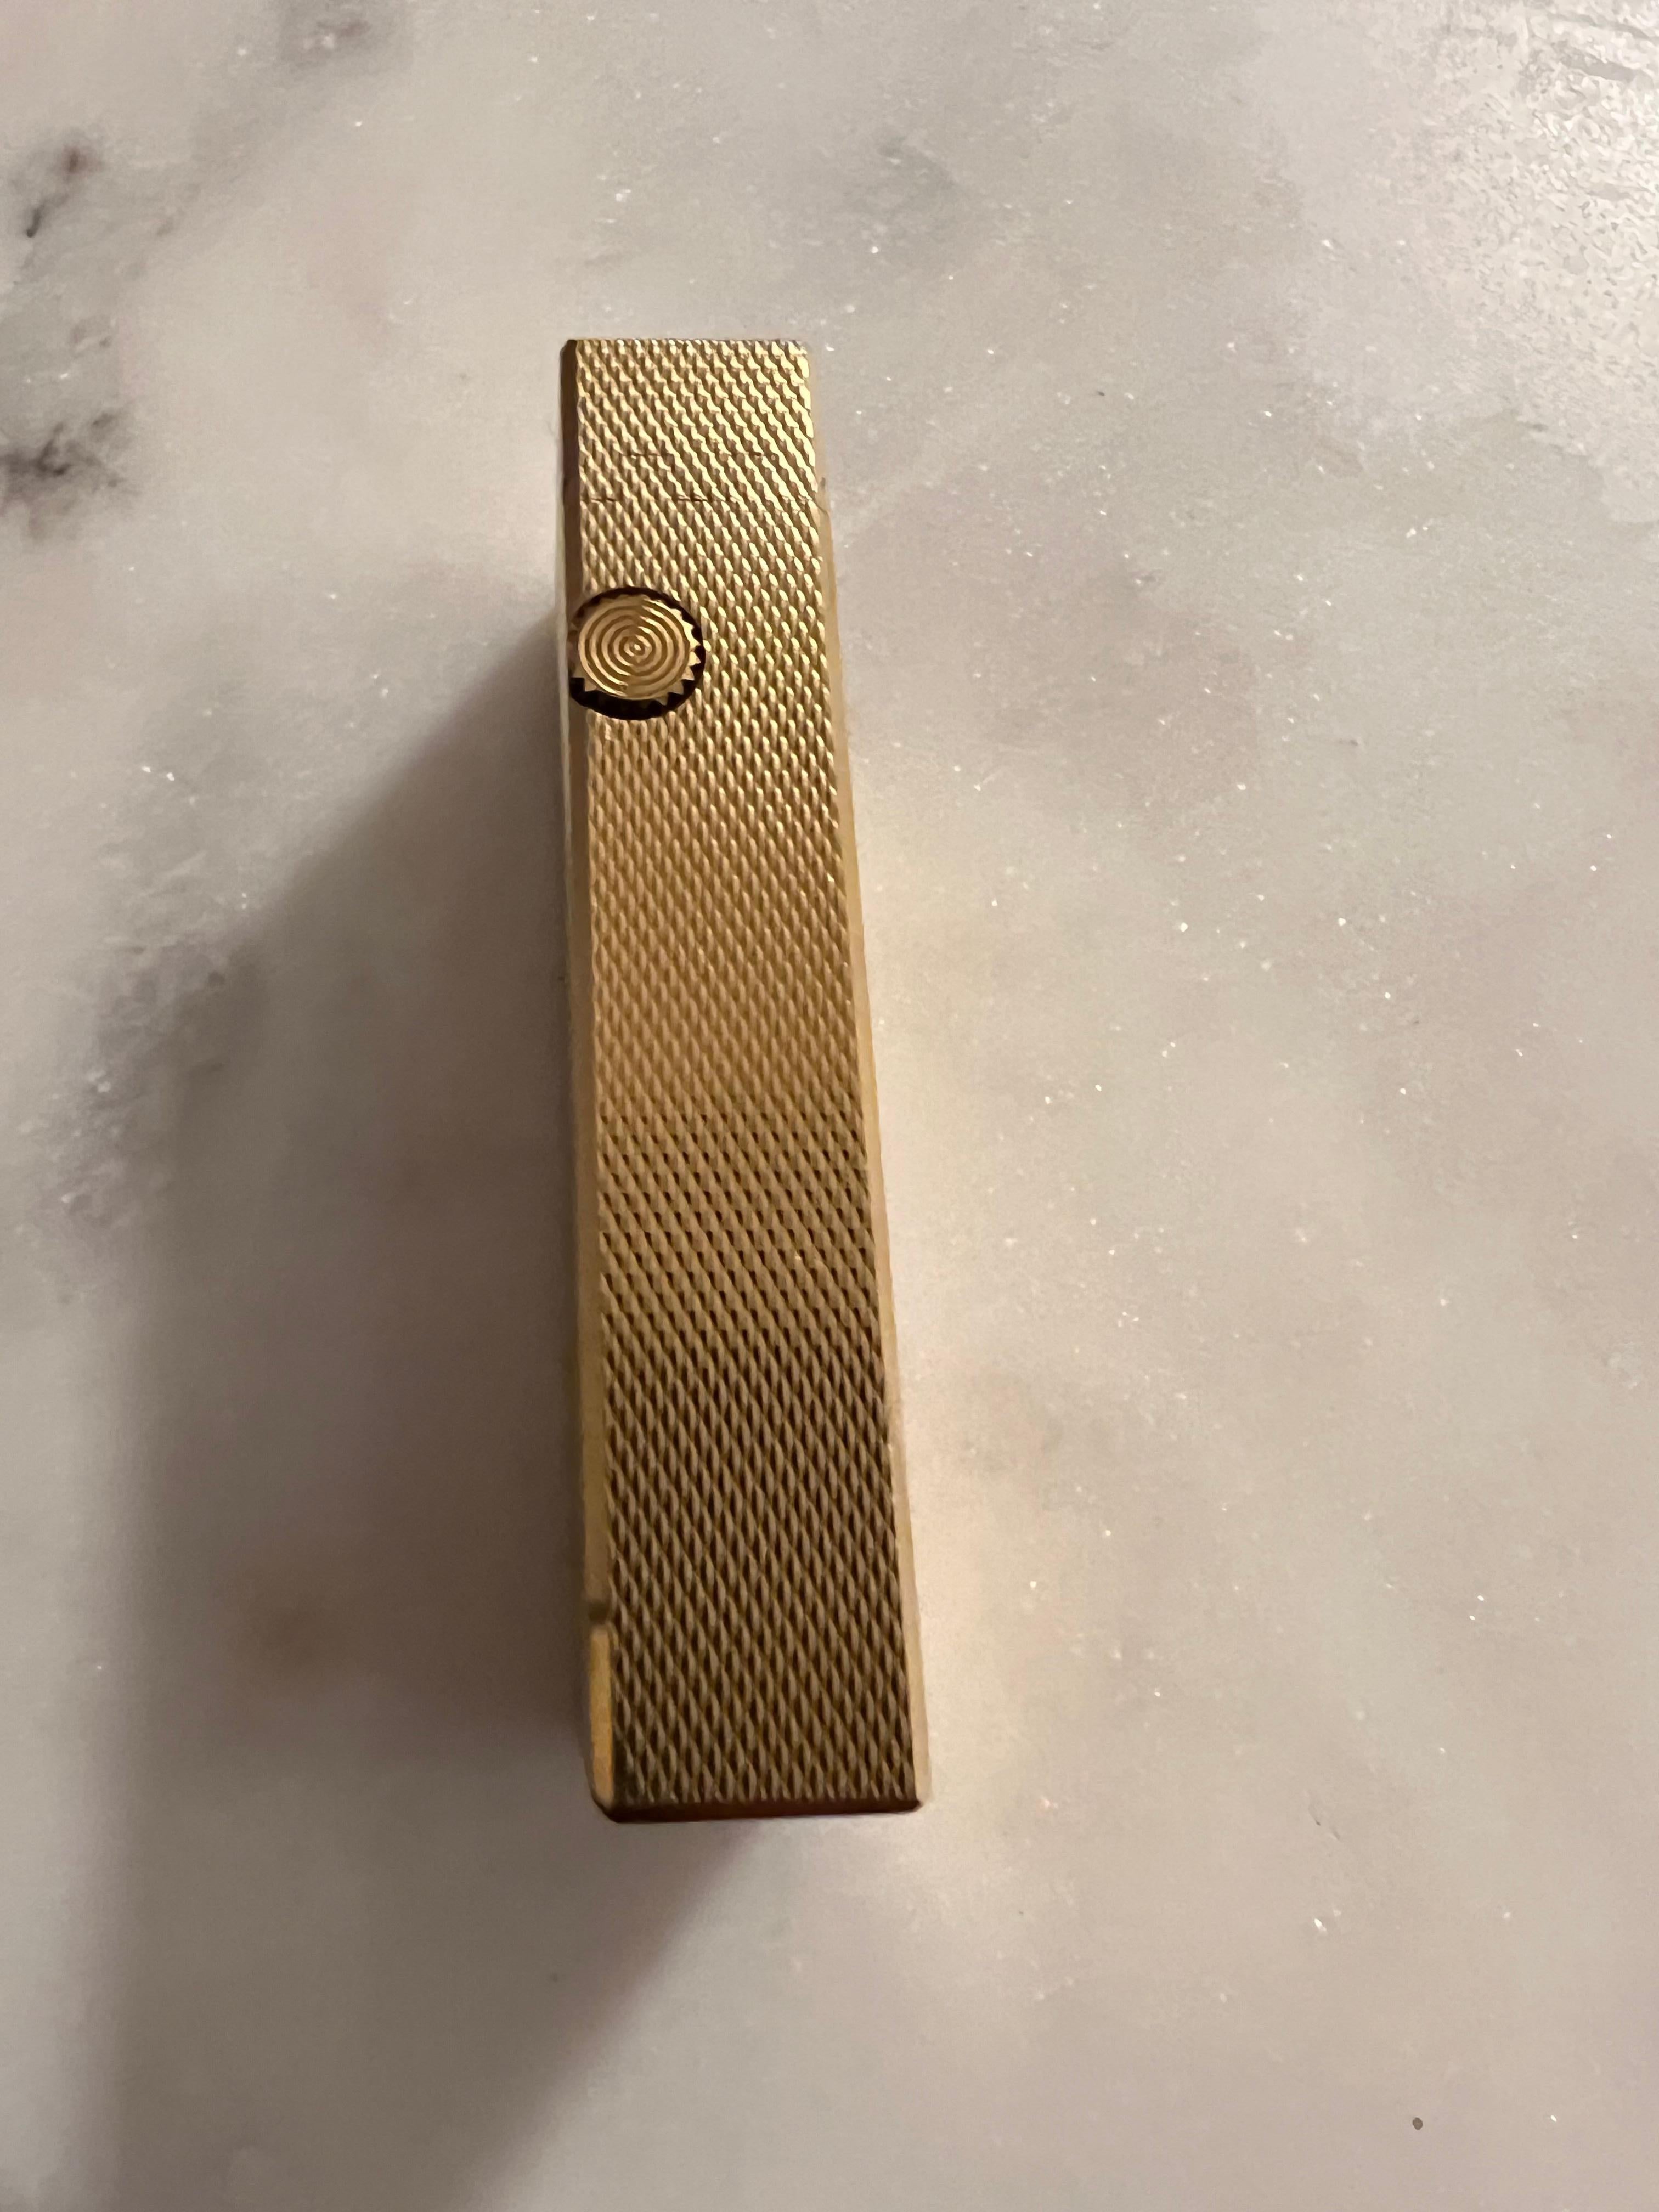 The James Bond Iconic and Rare Vintage Dunhill Gold and Swiss Made Lighter 8